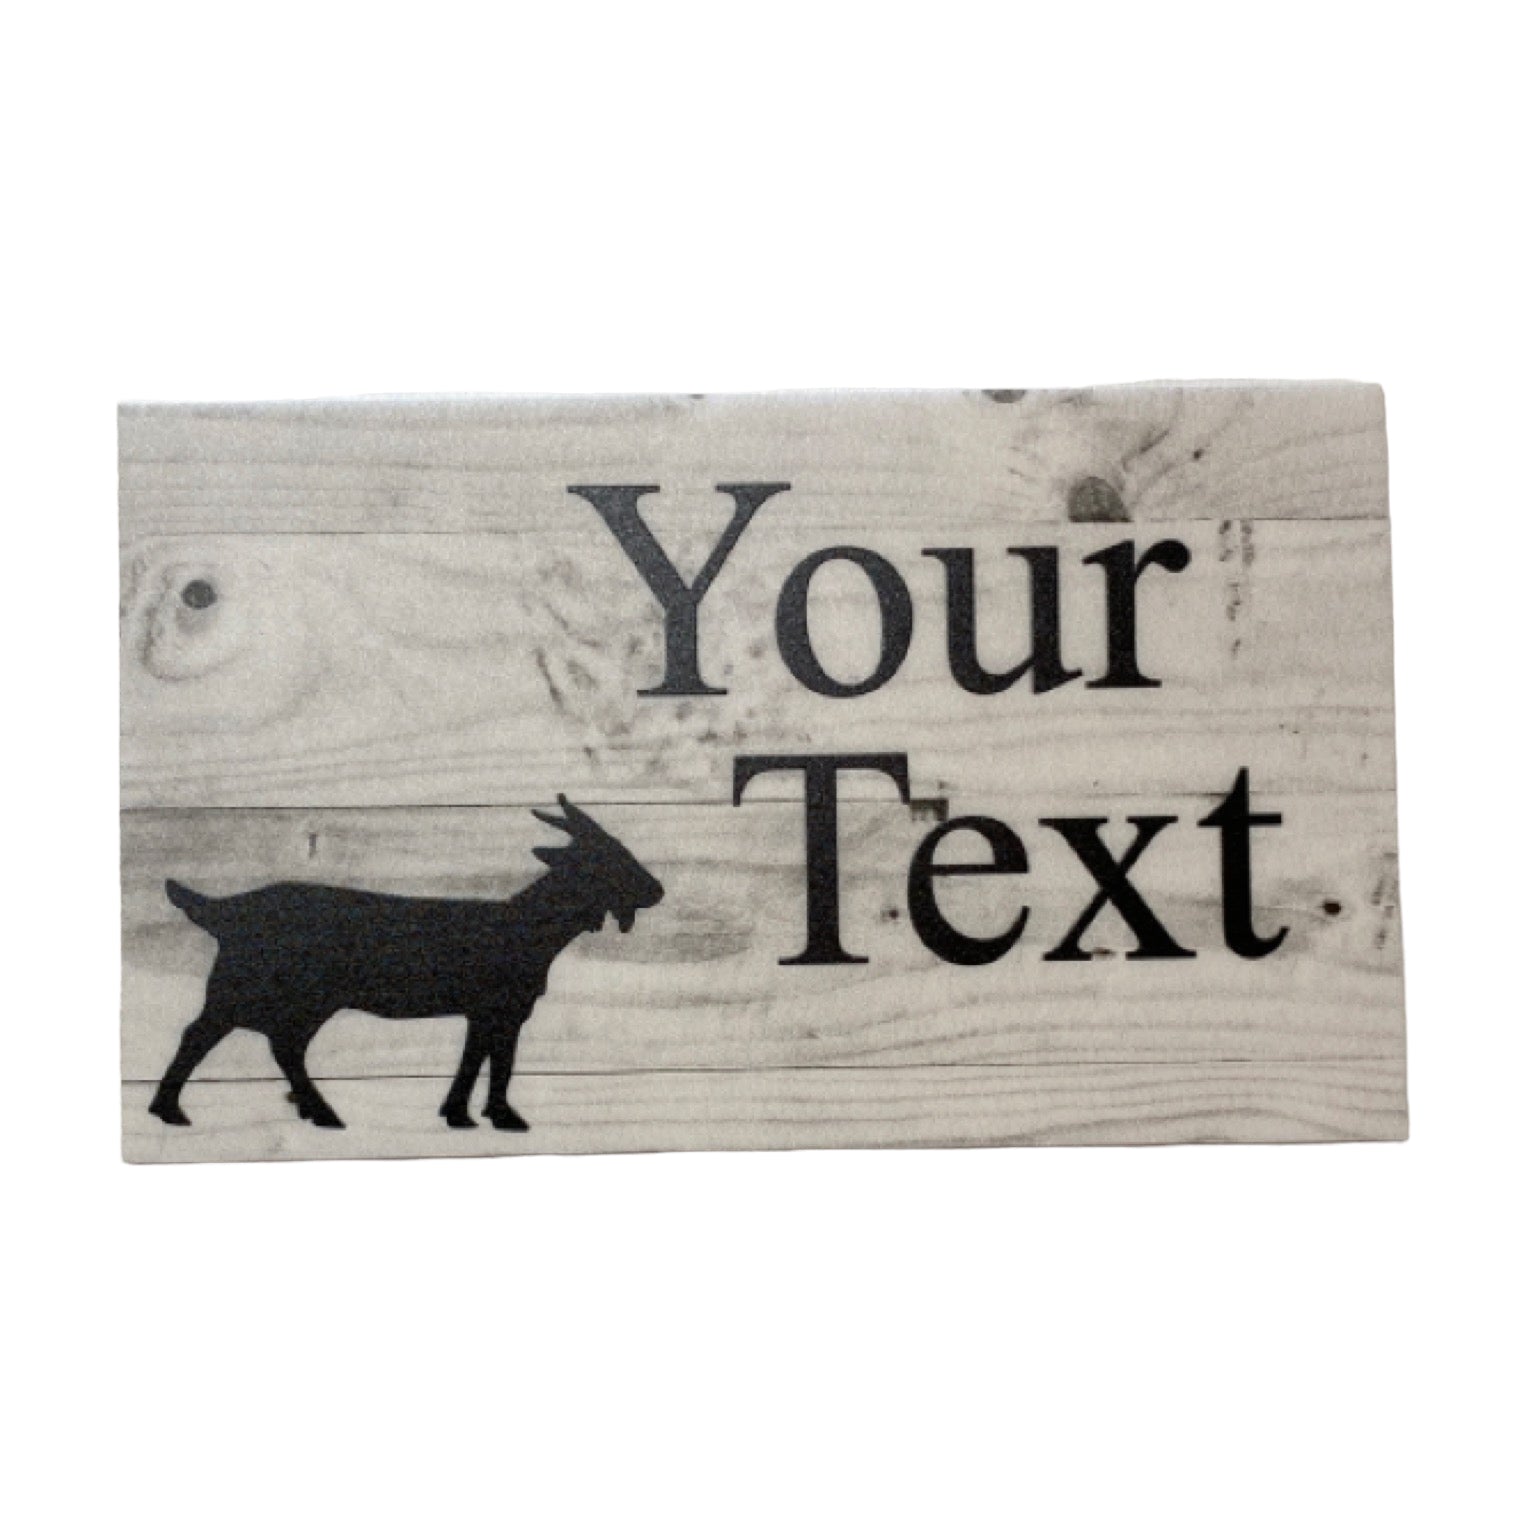 Goat Custom Persoanlised Country Farm Sign - The Renmy Store Homewares & Gifts 